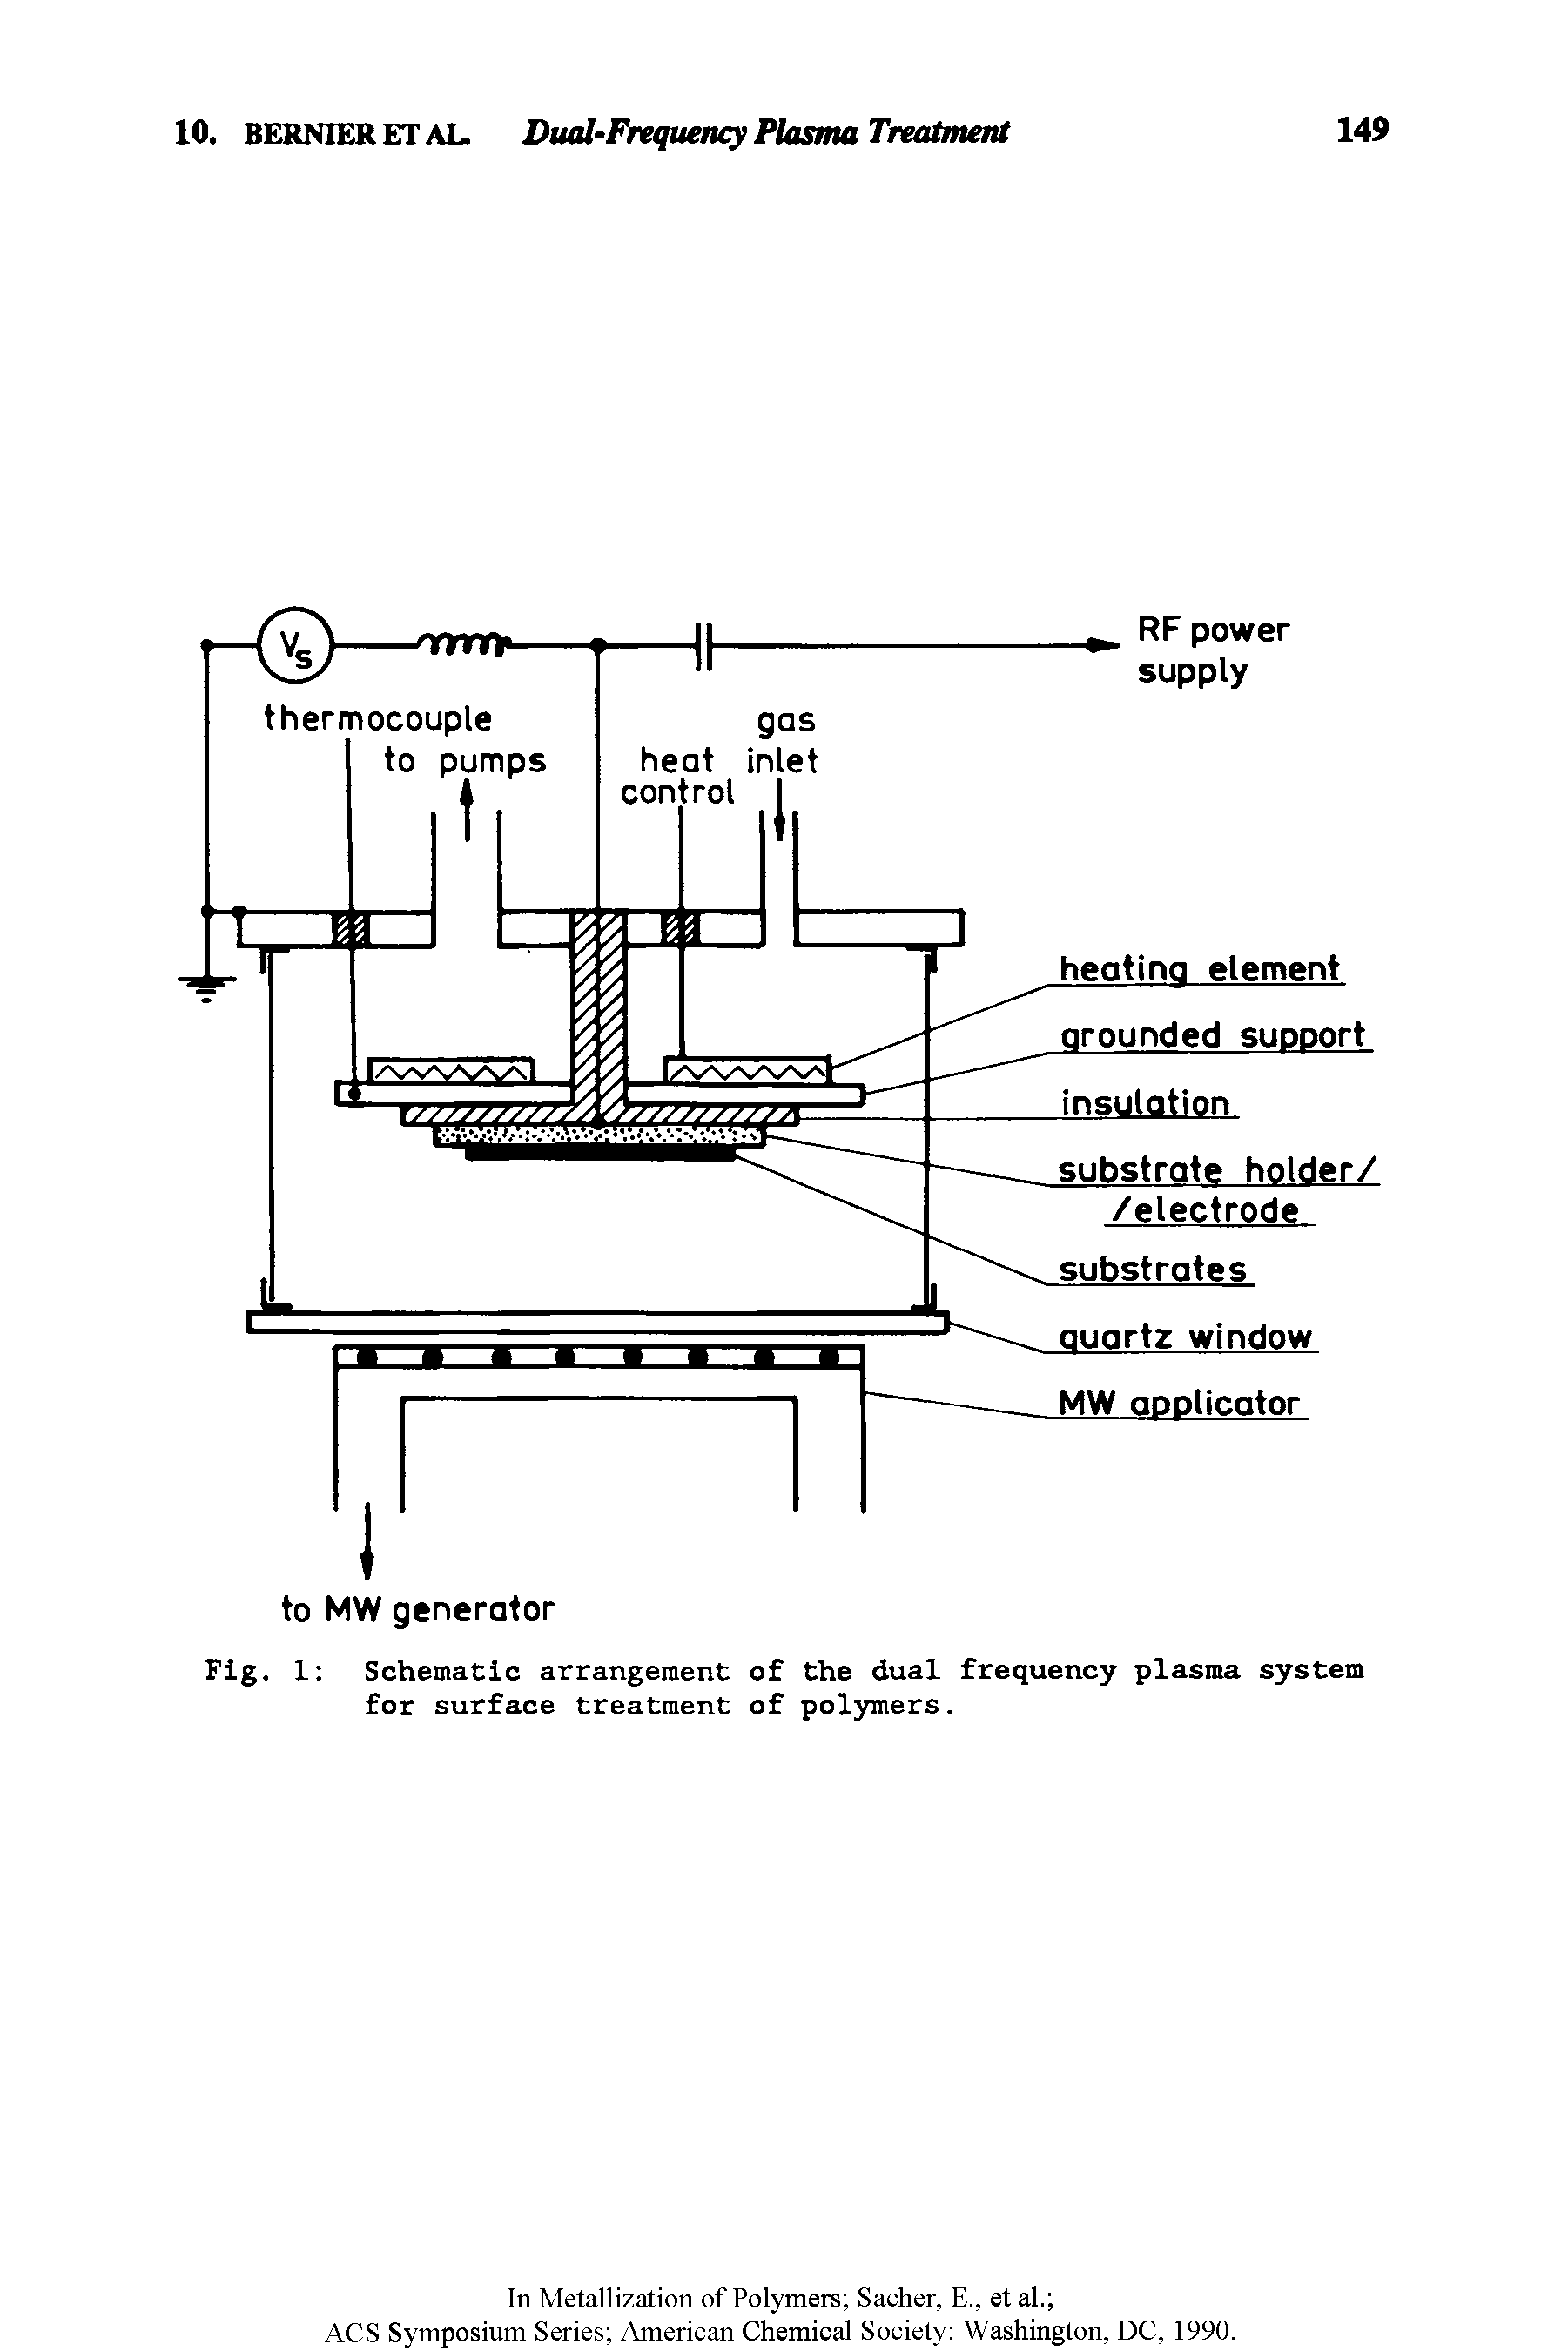 Fig. 1 Schematic arrangement of the dual frequency plasma system for surface treatment of polymers.